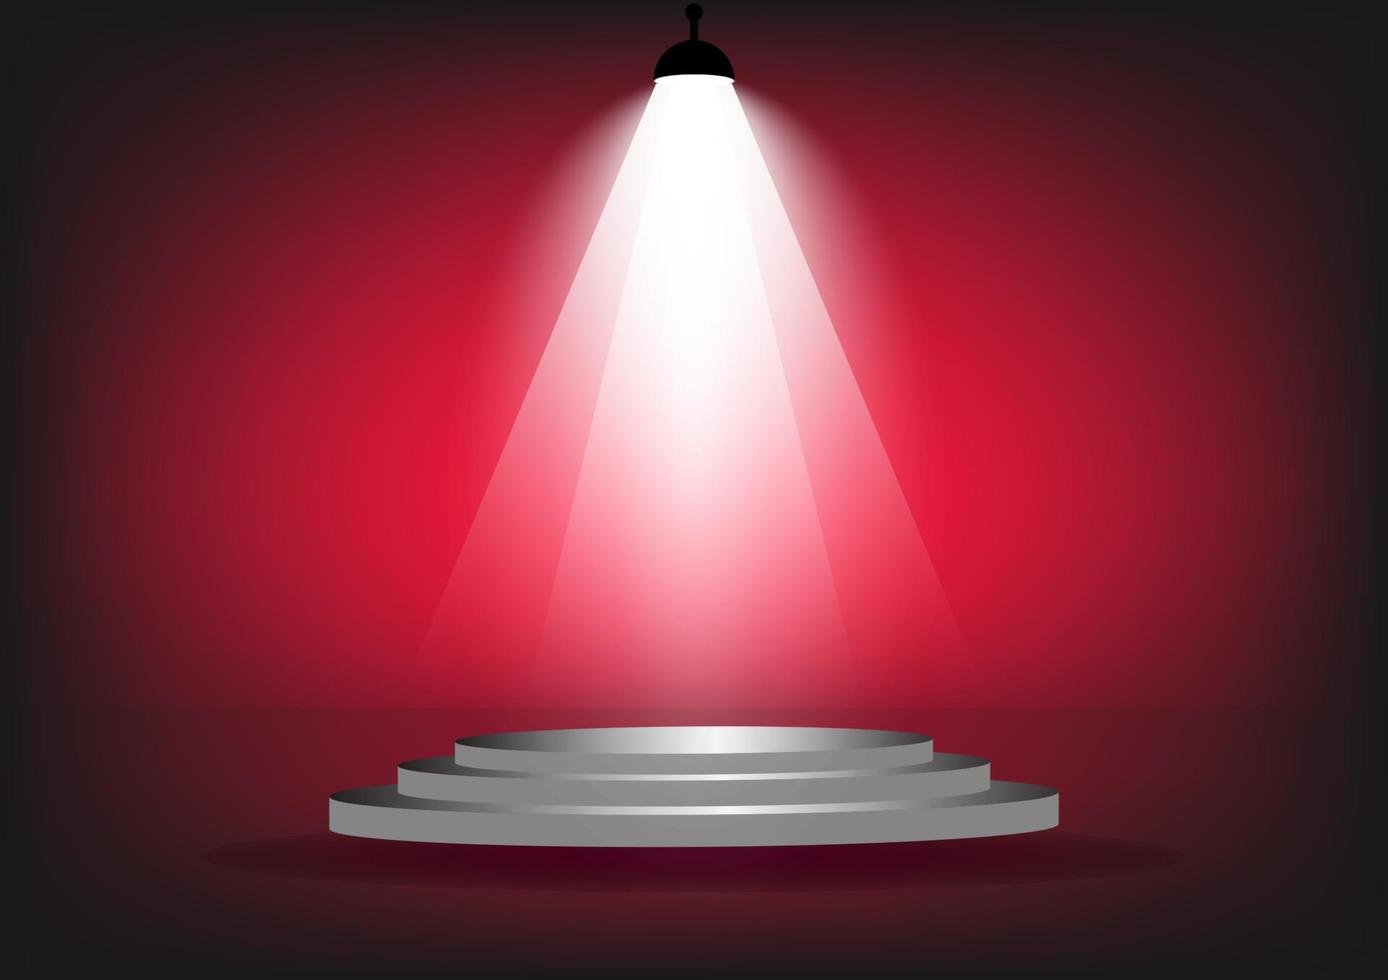 podium with spotlight for show with red wall background vector